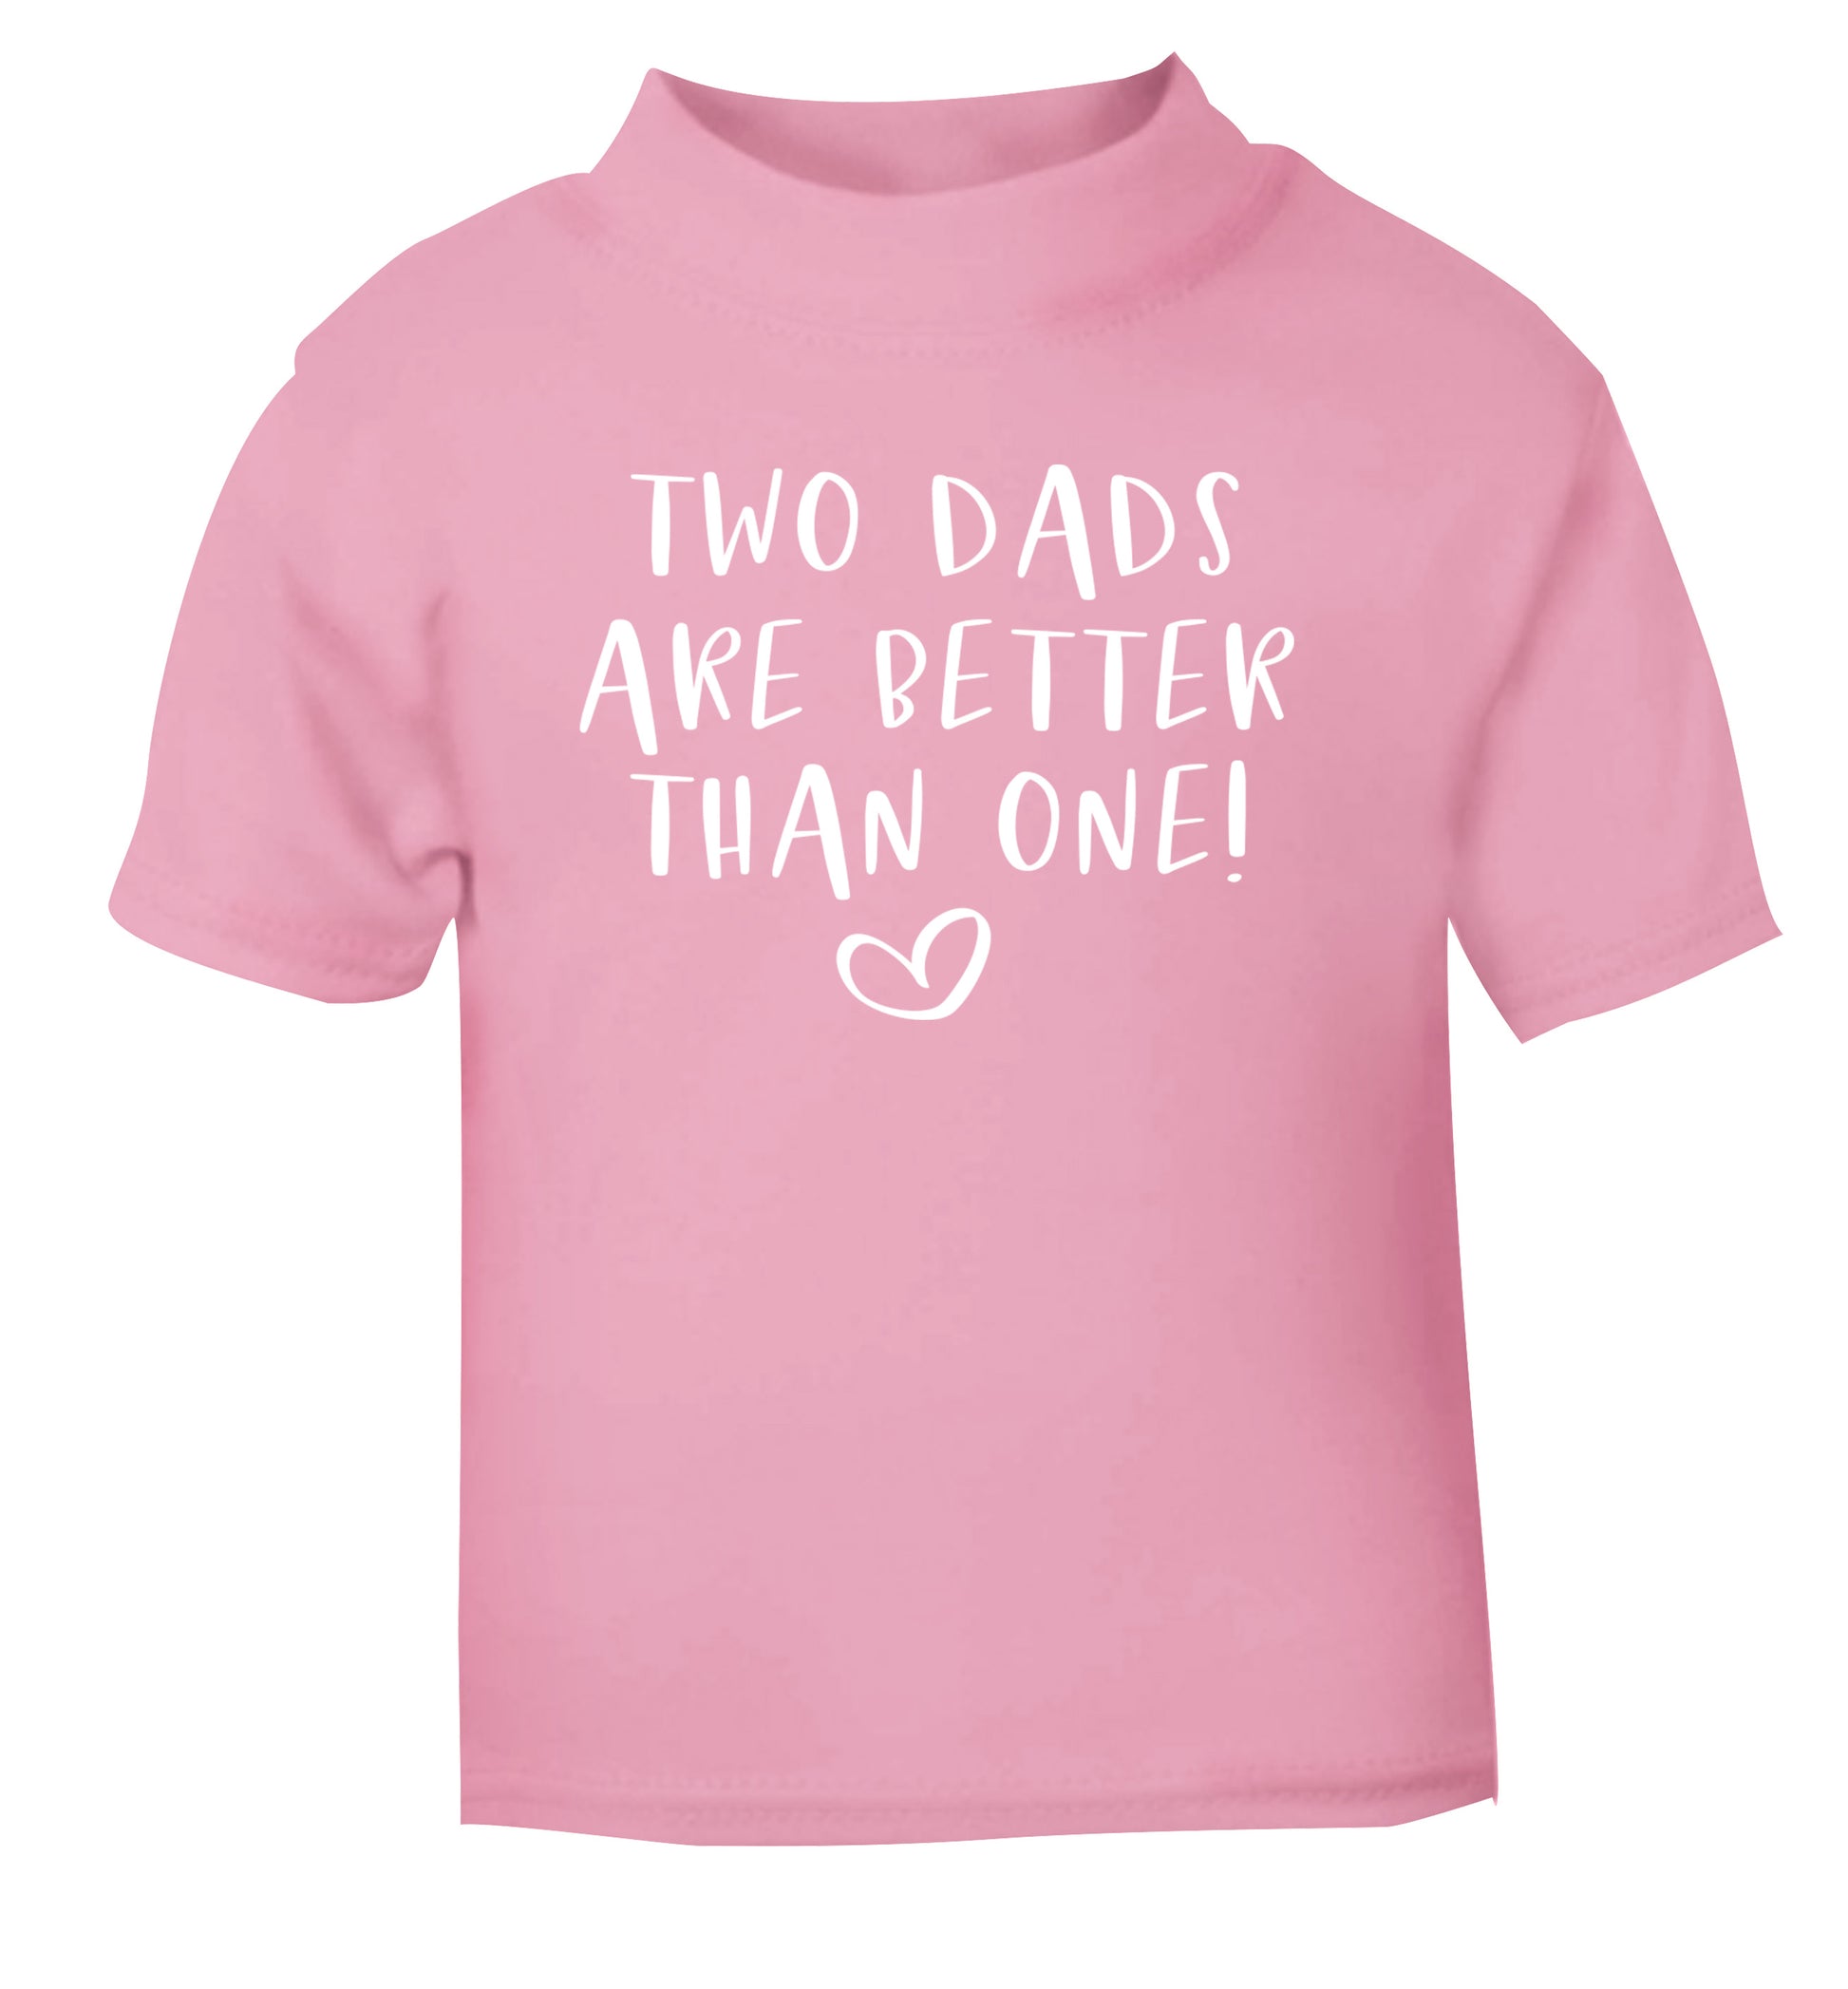 Two dads are better than one light pink Baby Toddler Tshirt 2 Years